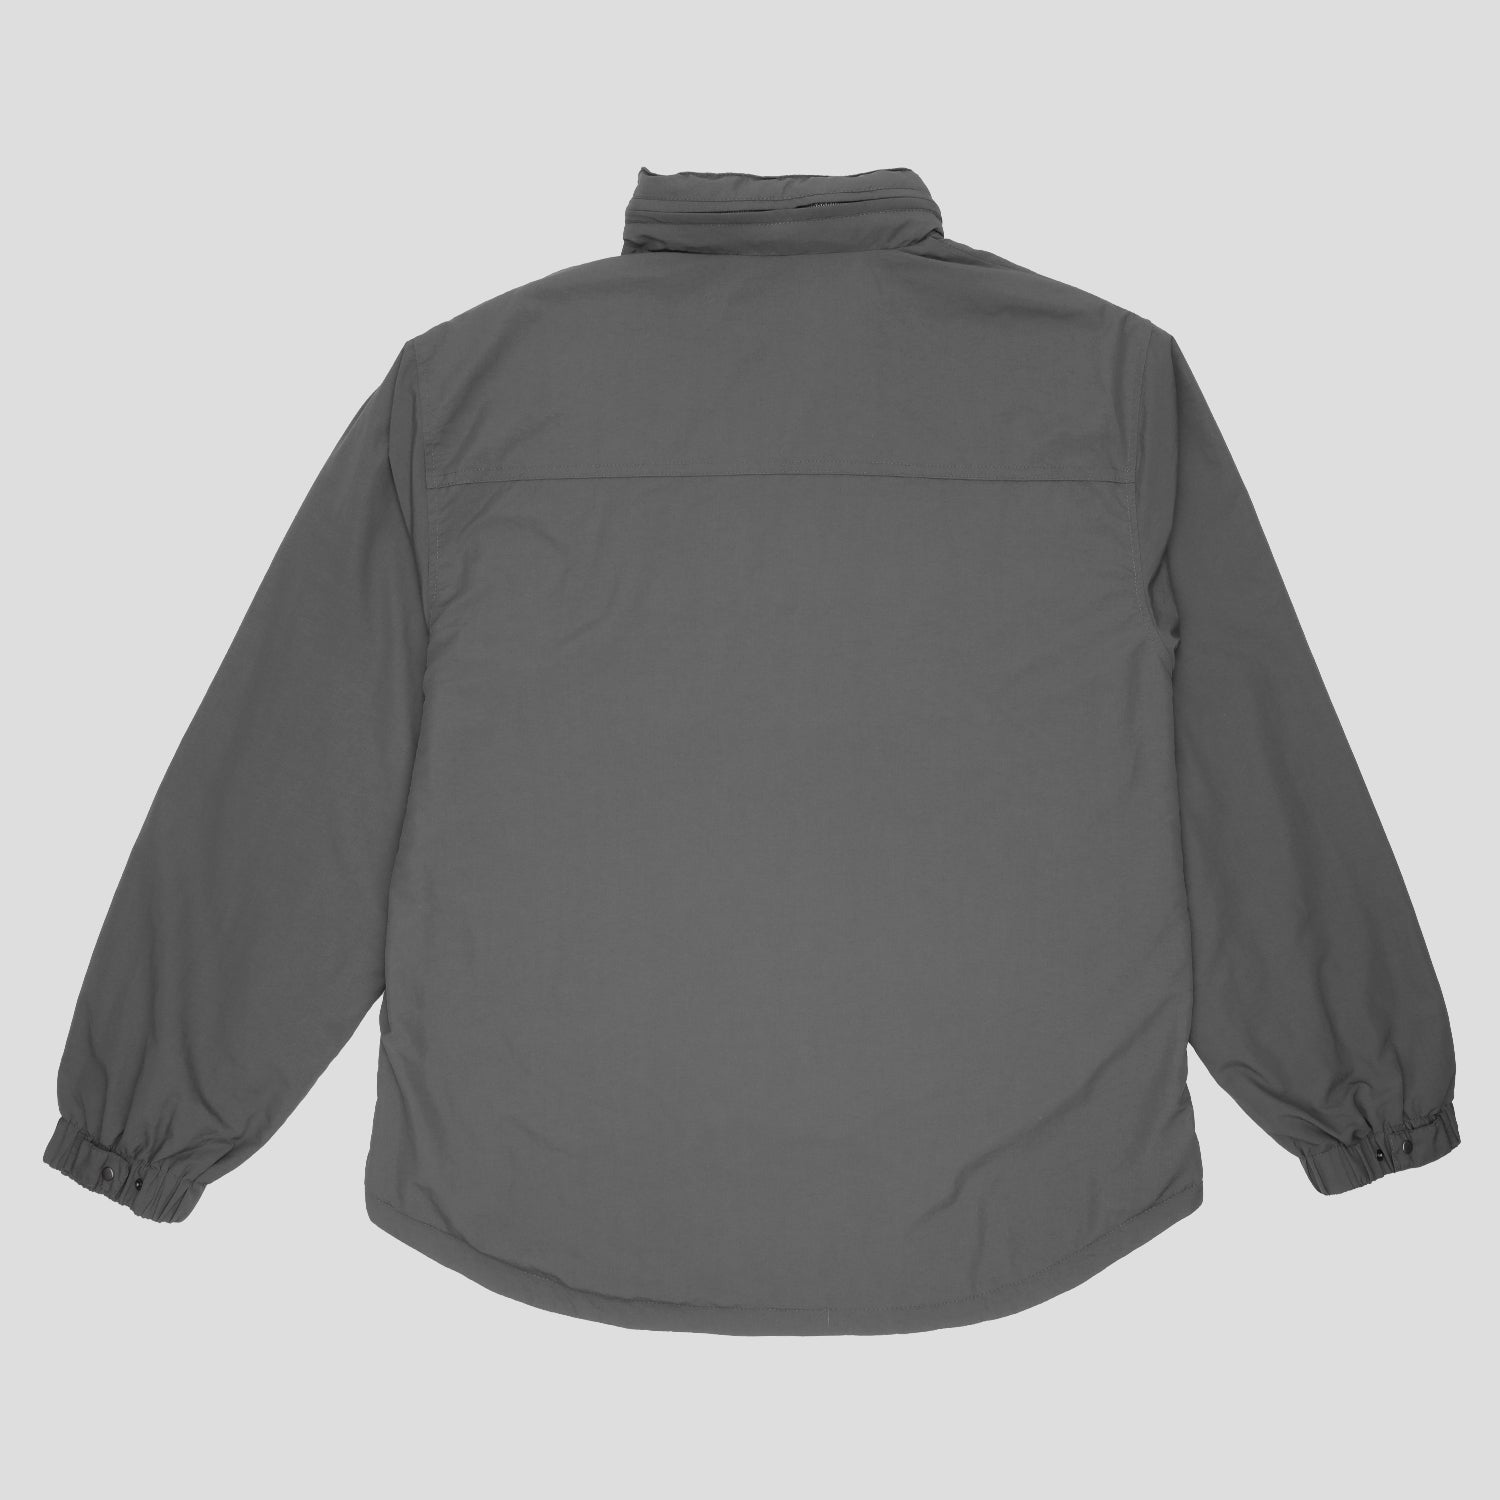 Pass~Port Pullover Lined Spray Jacket RPET - Charcoal